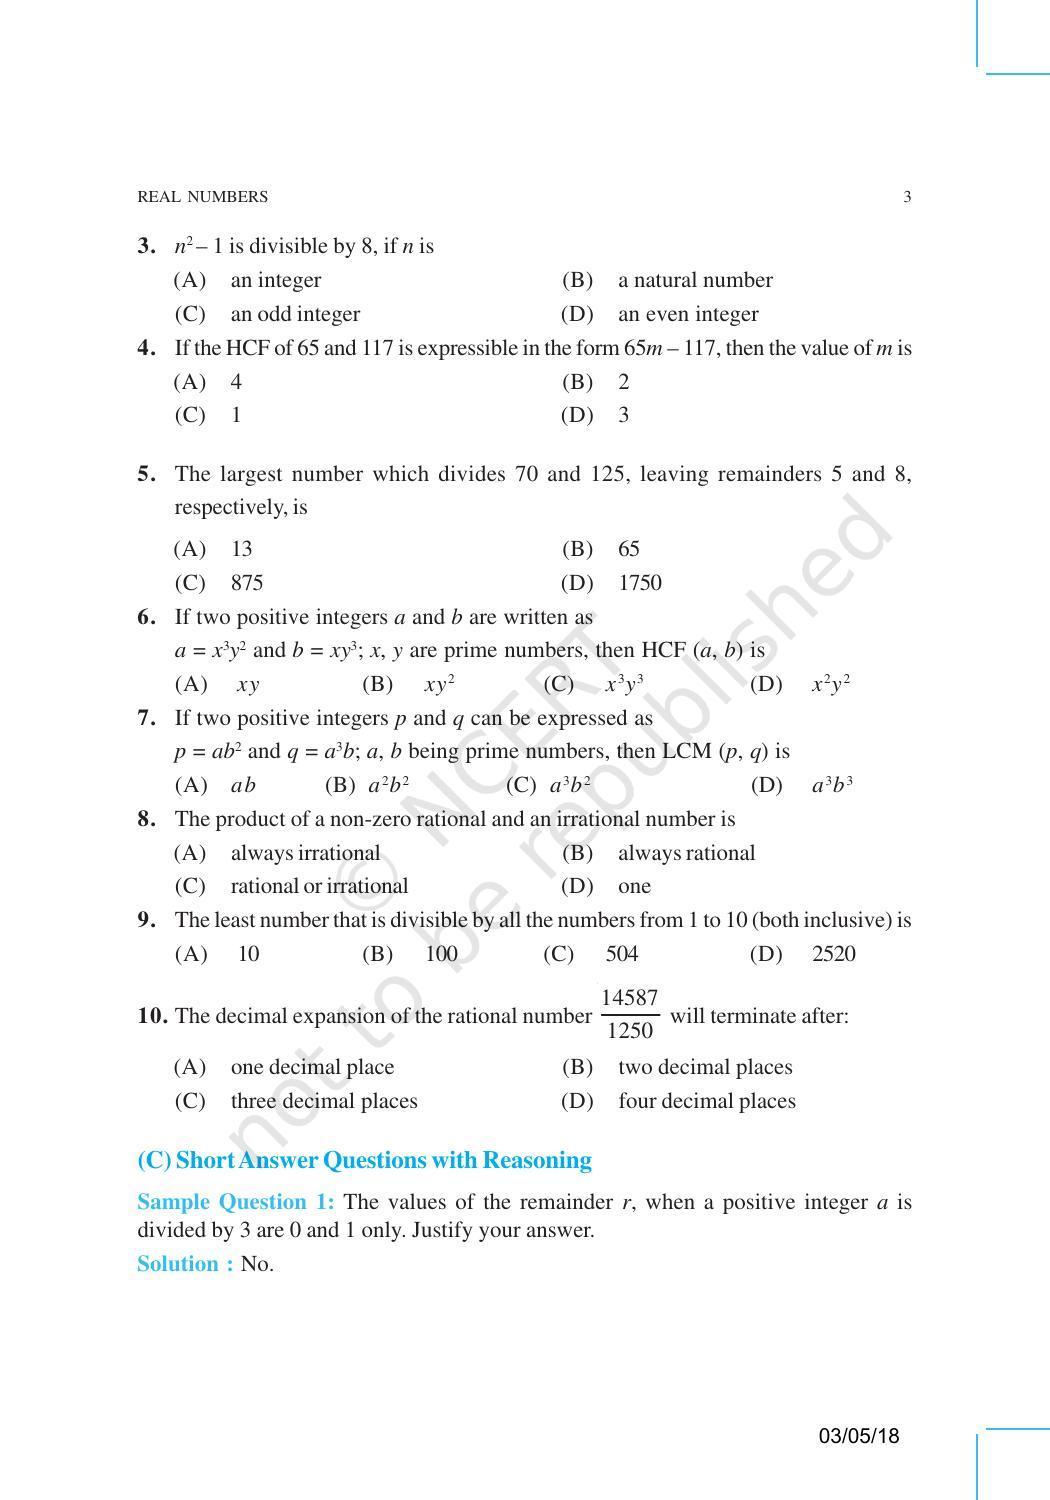 NCERT Exemplar Book for Class 10 Maths: Chapter 1 Real Numbers - Page 3